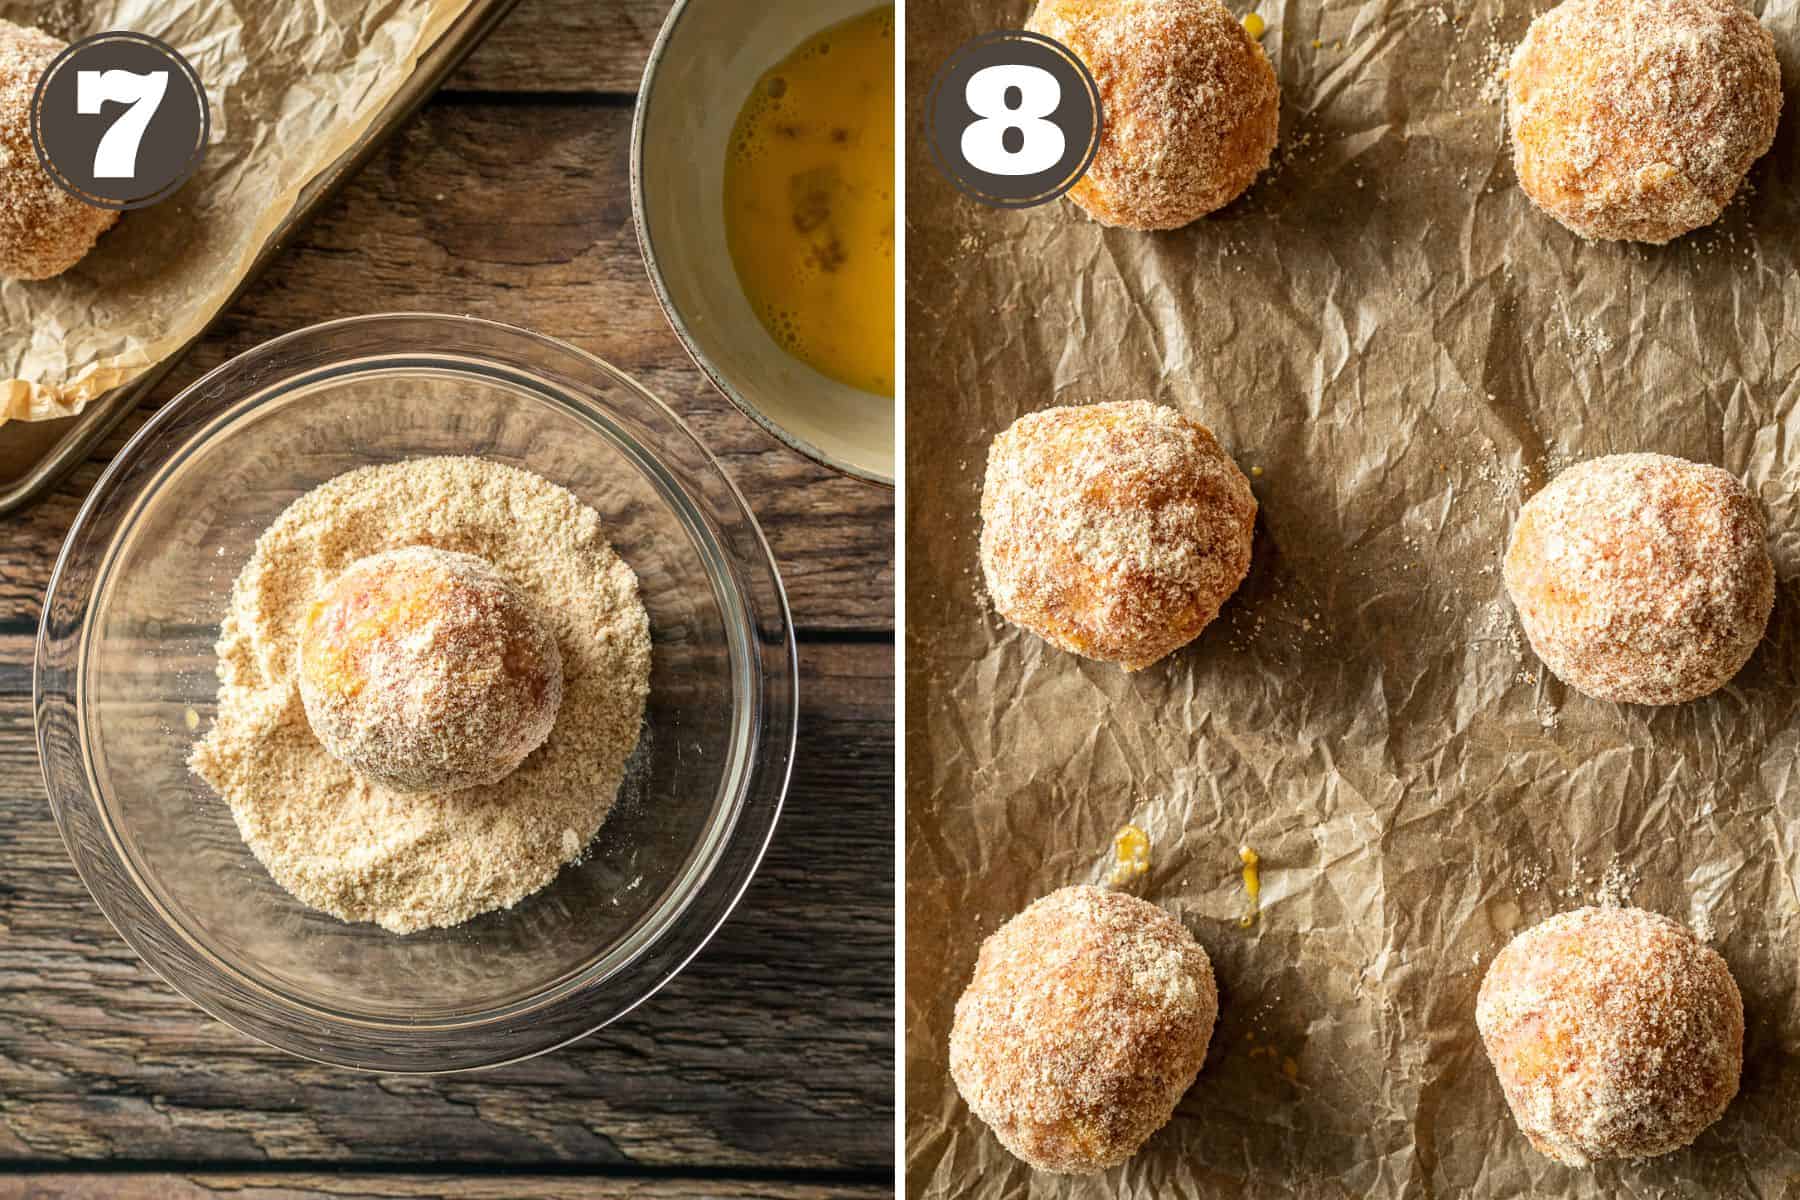 Side by side photos showing scotch eggs being rolled in gluten-free breading and placed on a baking sheet.